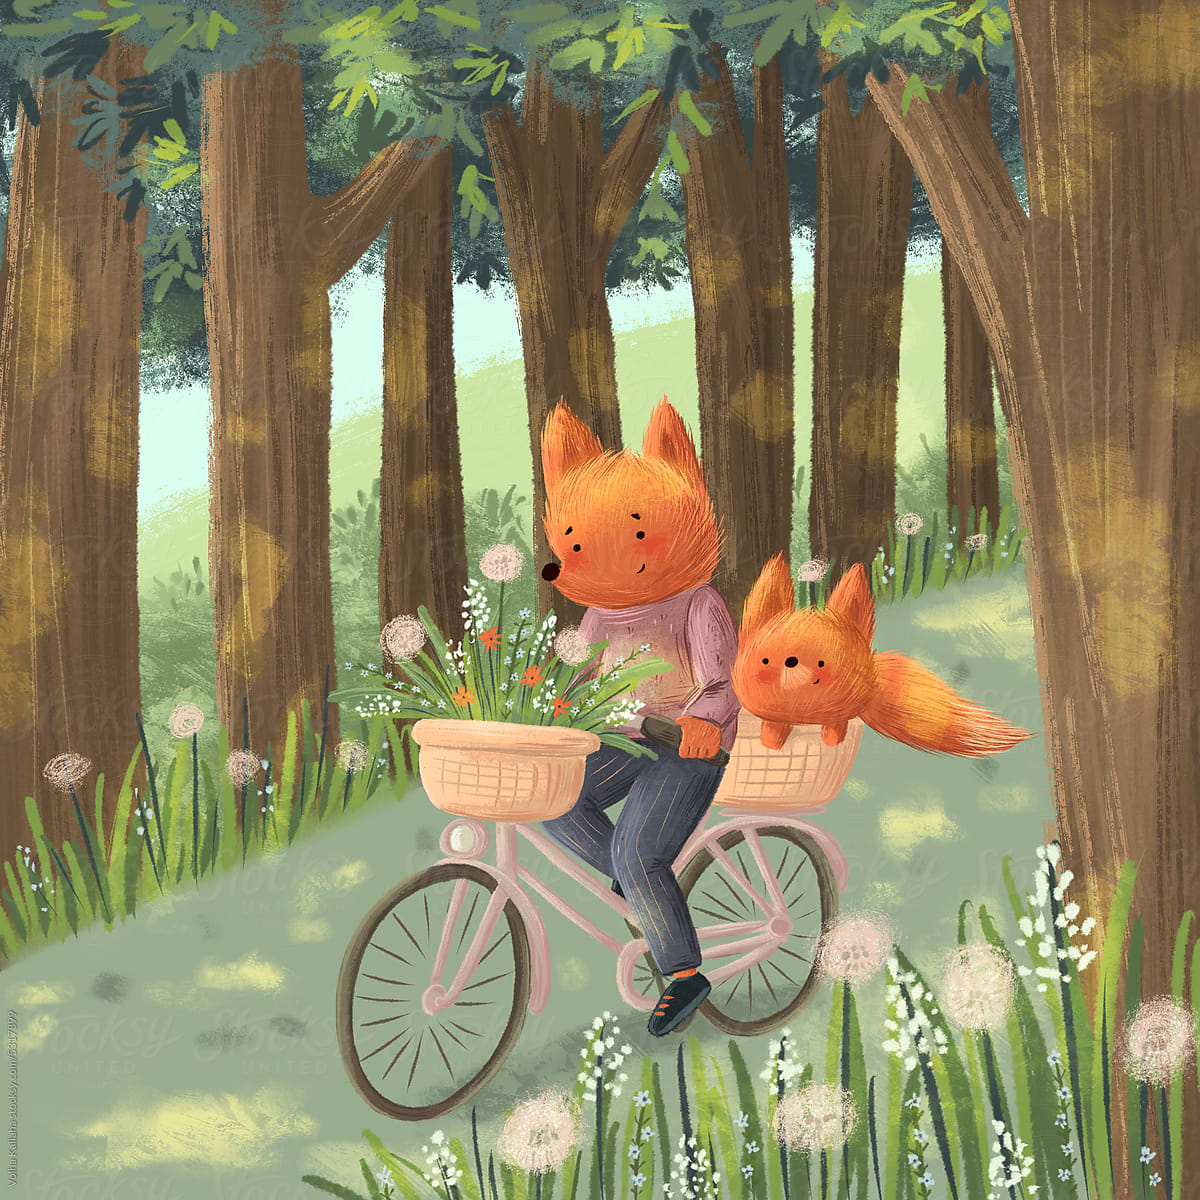 Foxes riding a bike in the park